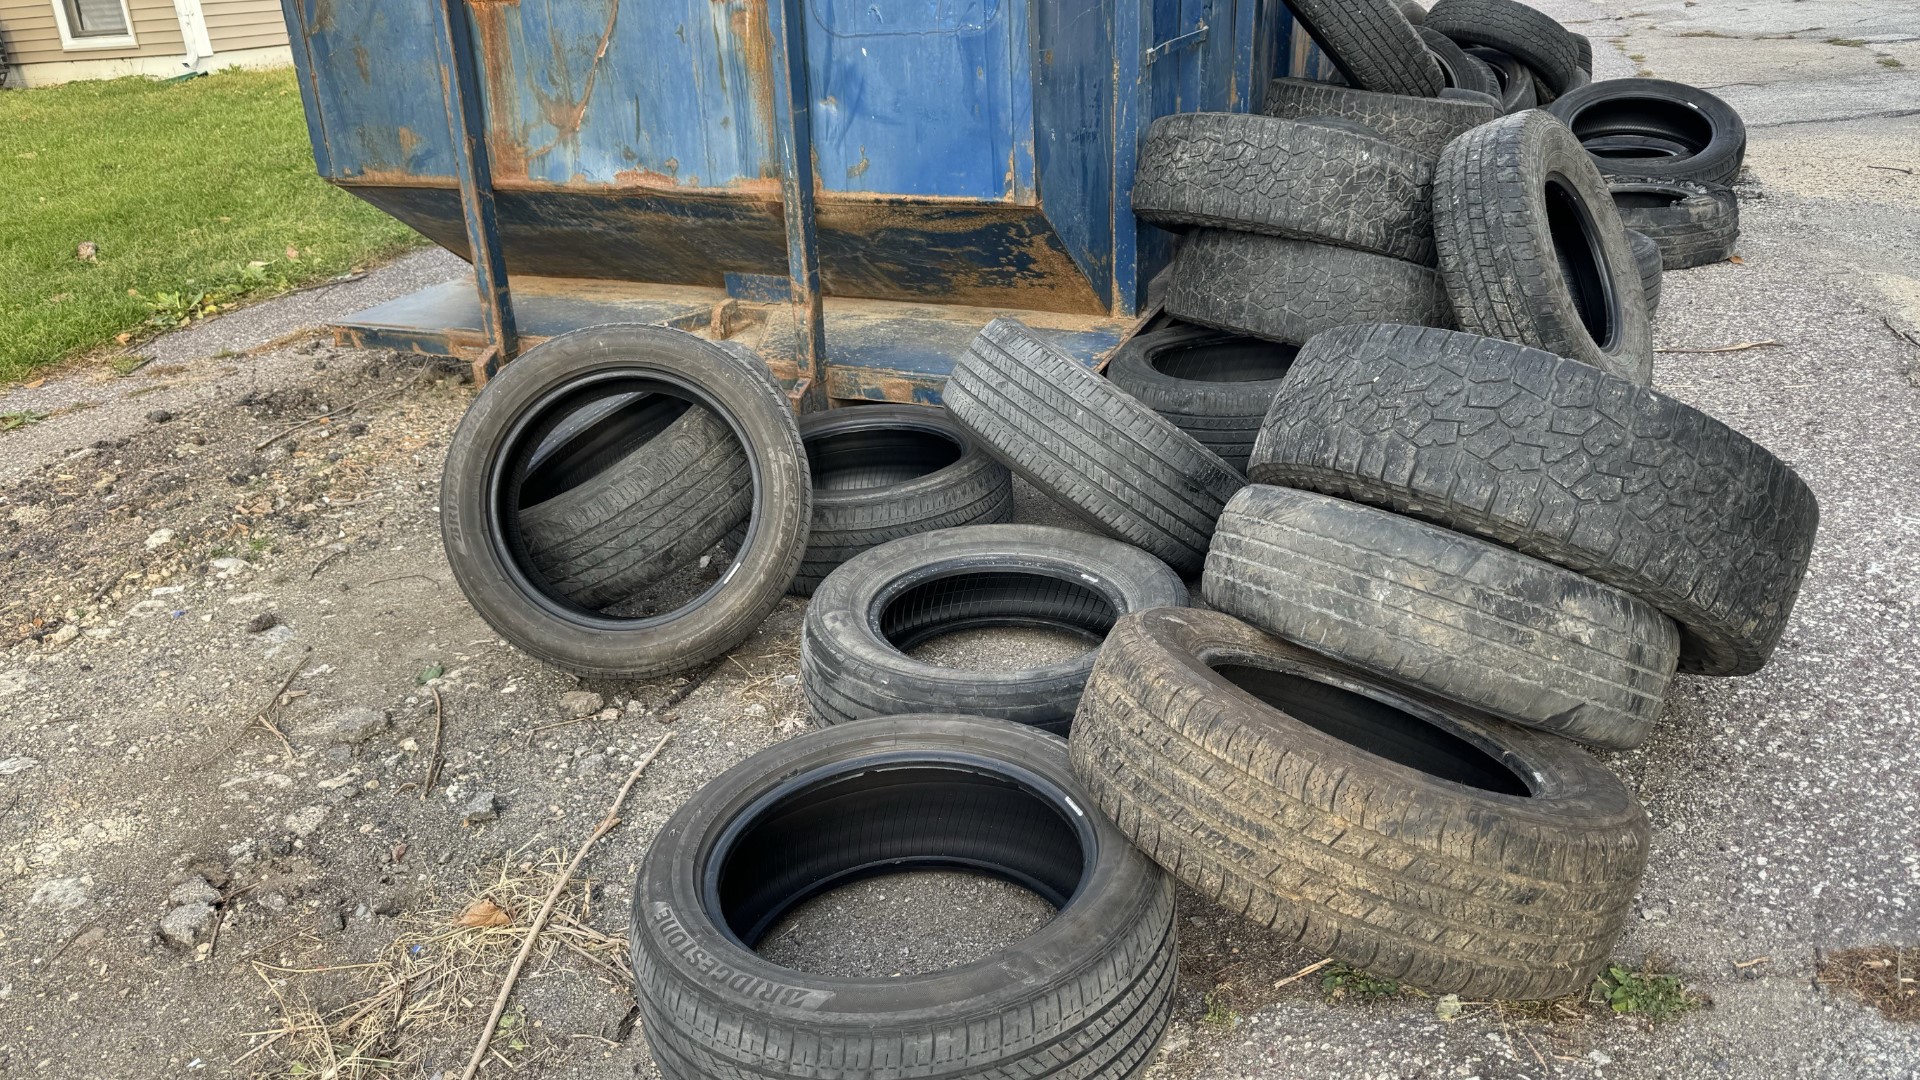 The property manager says they've been burning through cash quickly over the last several months all because someone keeps dumping piles of tires on their property.